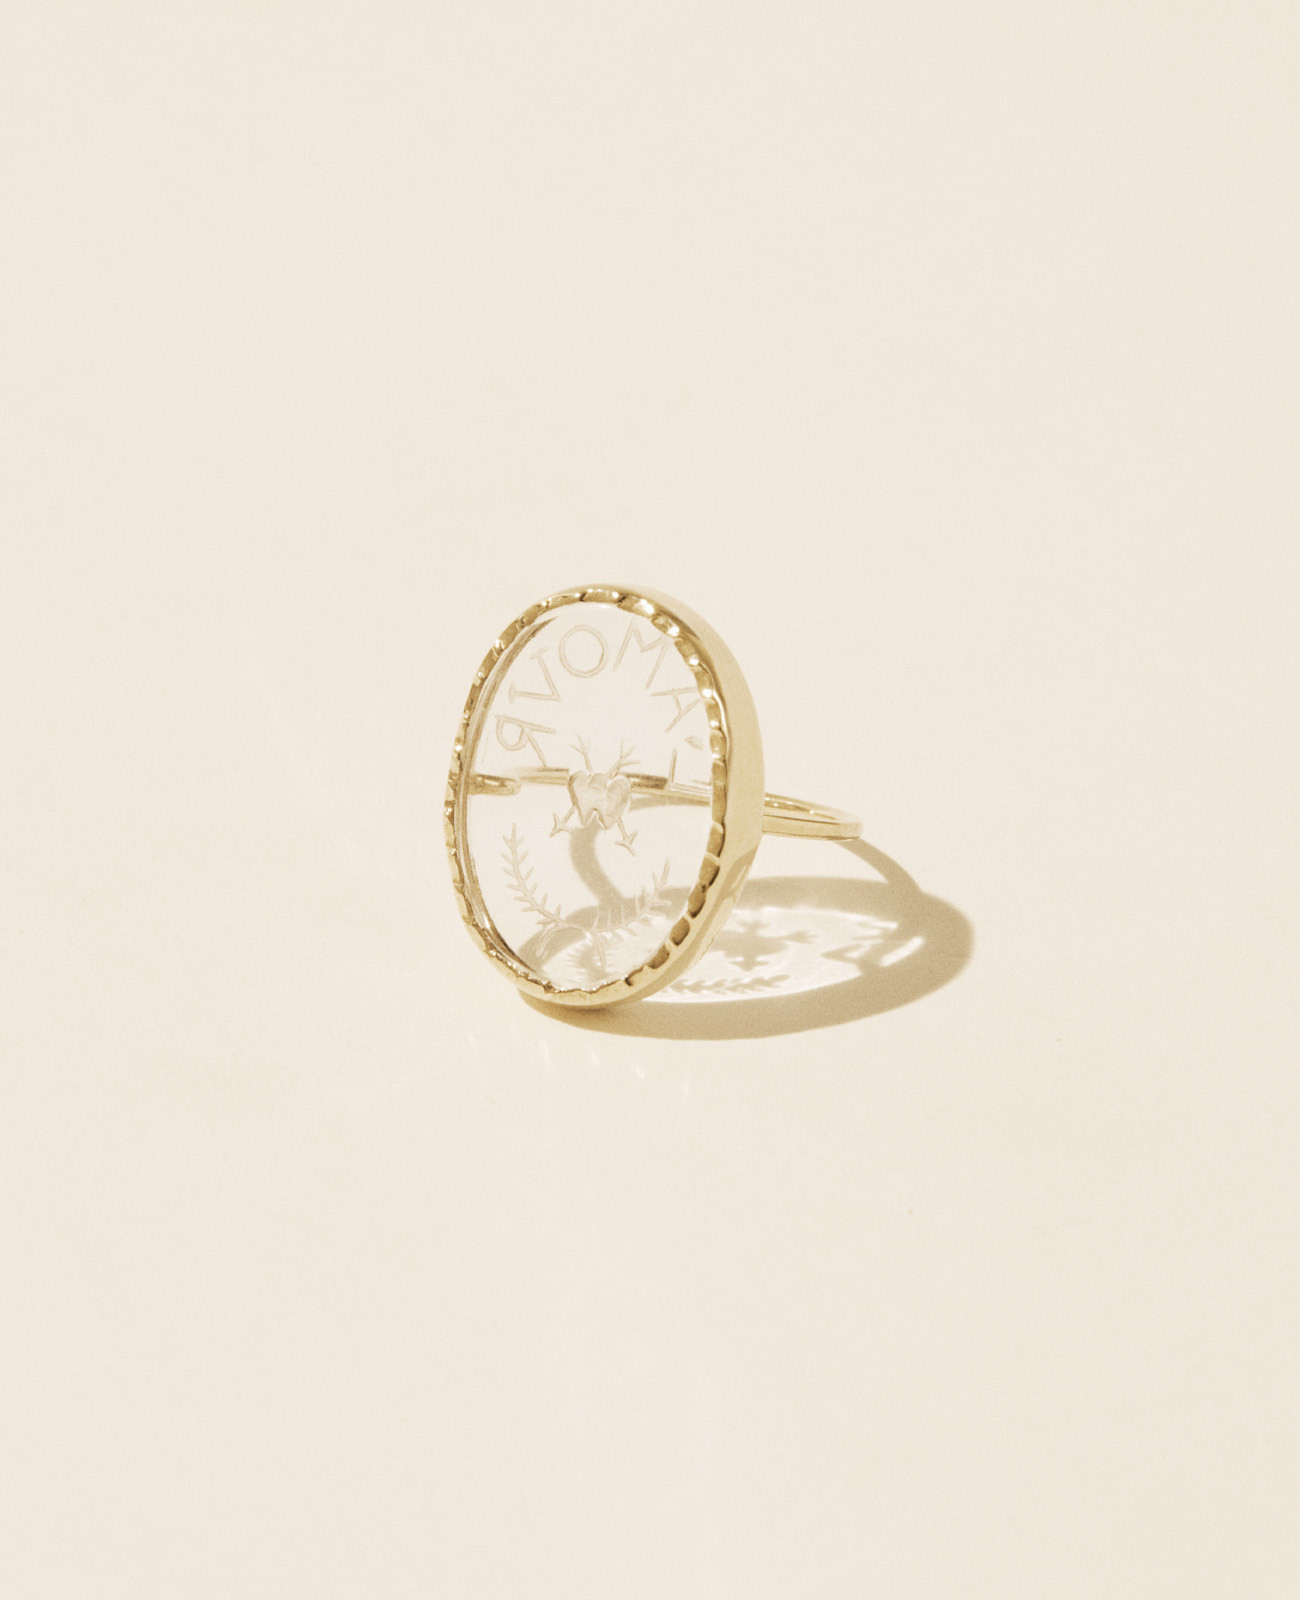 L'AMOUR CRYSTAL ring pascale monvoisin jewelry paris